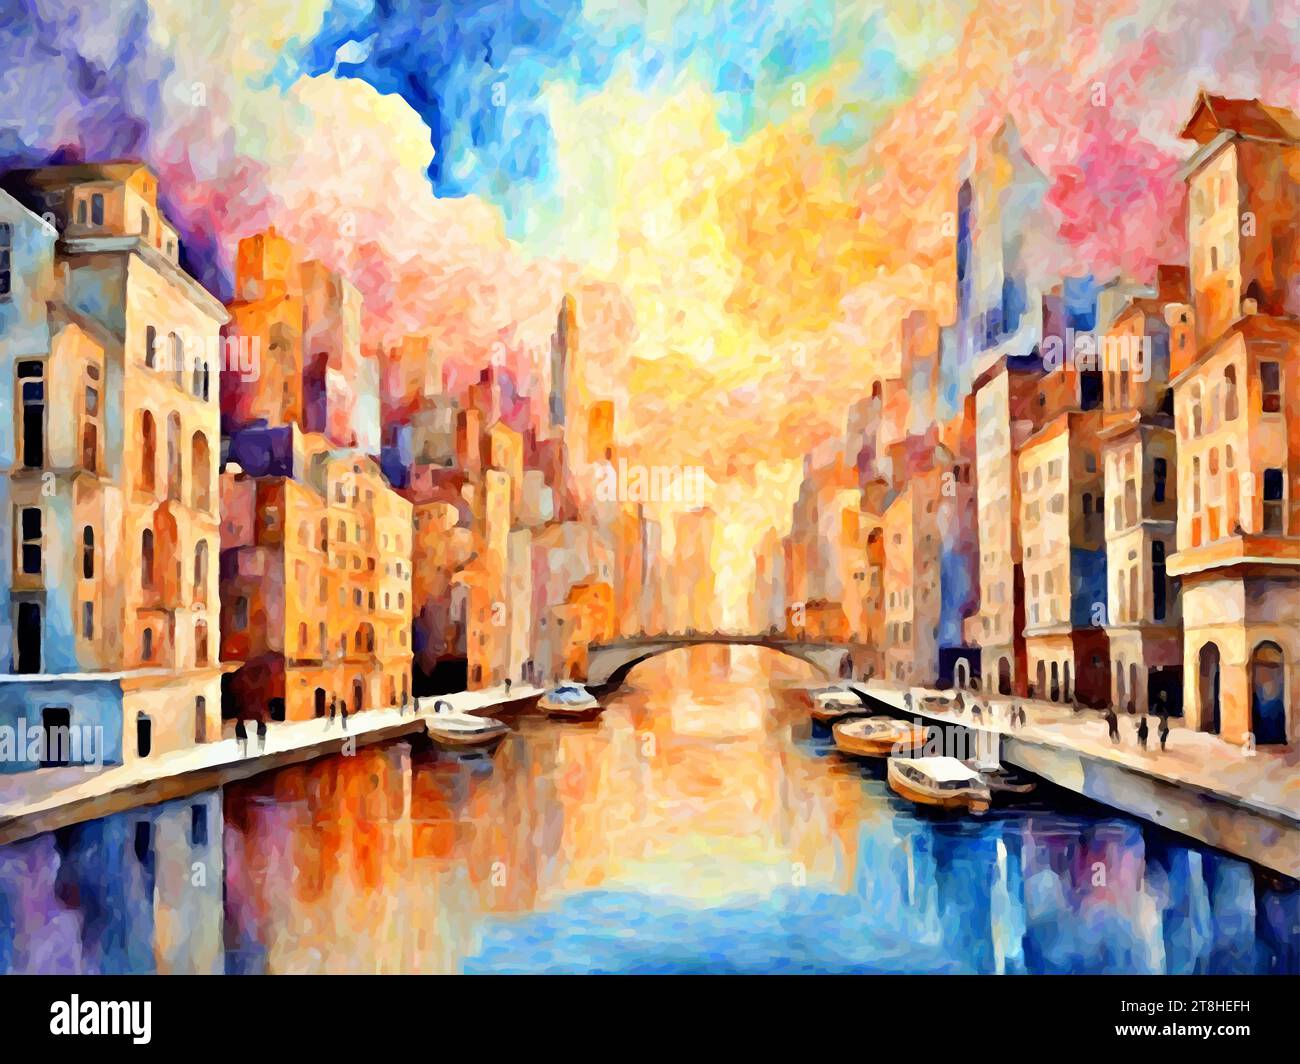 'A vibrant painting capturing the energy of urban life.' Stock Vector